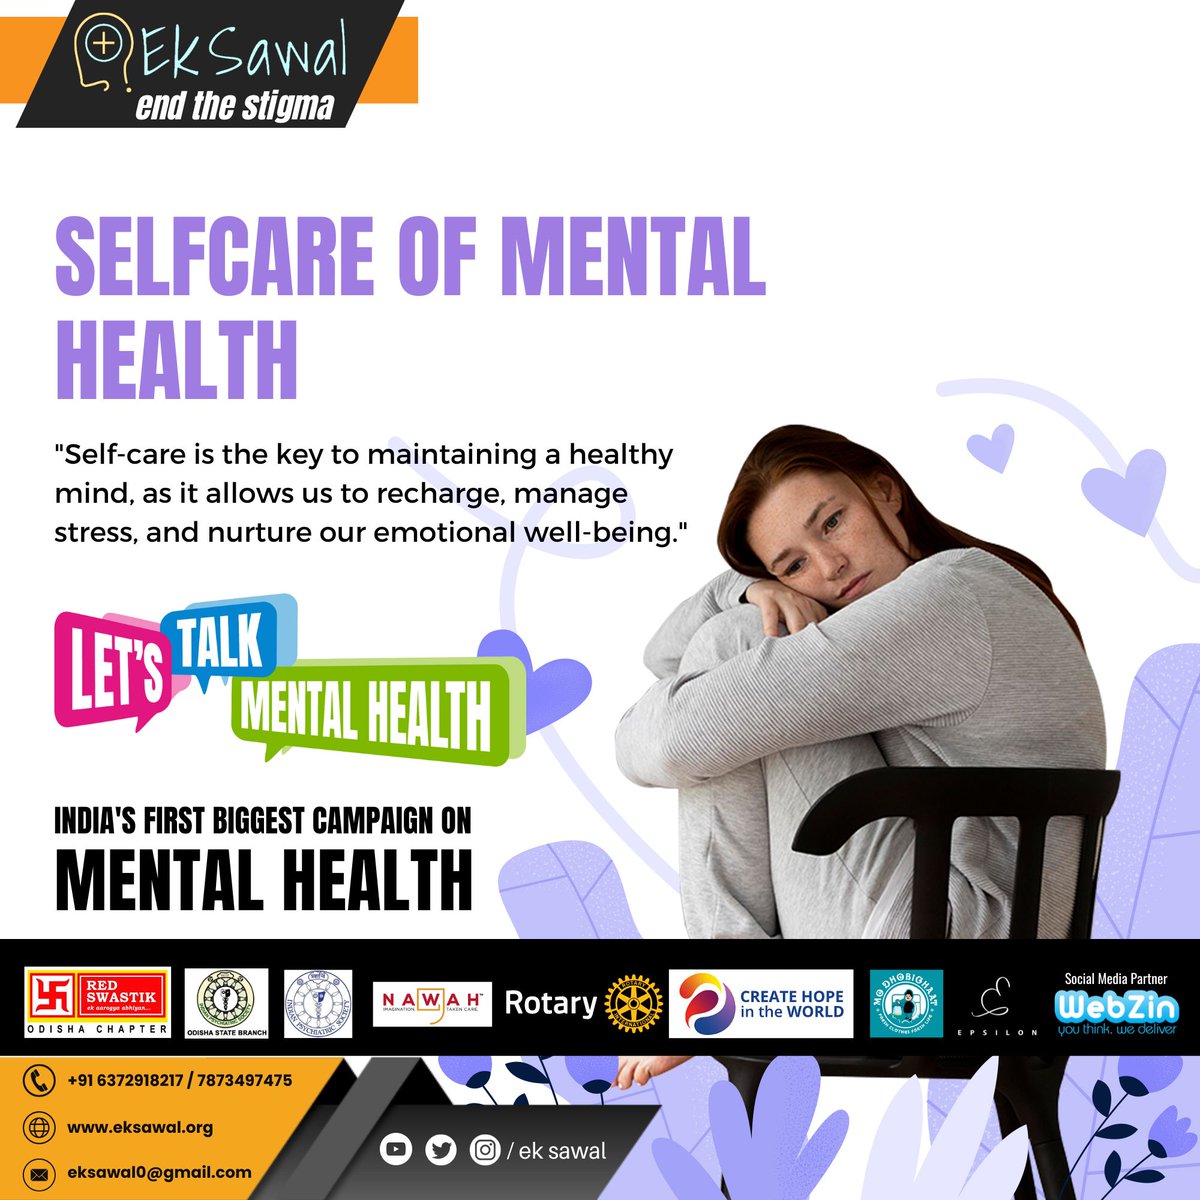 Ek Sawal' is a simple yet profound act of self-care. It keeps you in touch with your emotions and helps you navigate life's ups and downs.#SelfCareMatters #MentalWellness #MindfulSelfCare #MentalHealthJourney #WellnessWednesday #HealthyMind #MindBodySoul #endstigma #eksawal